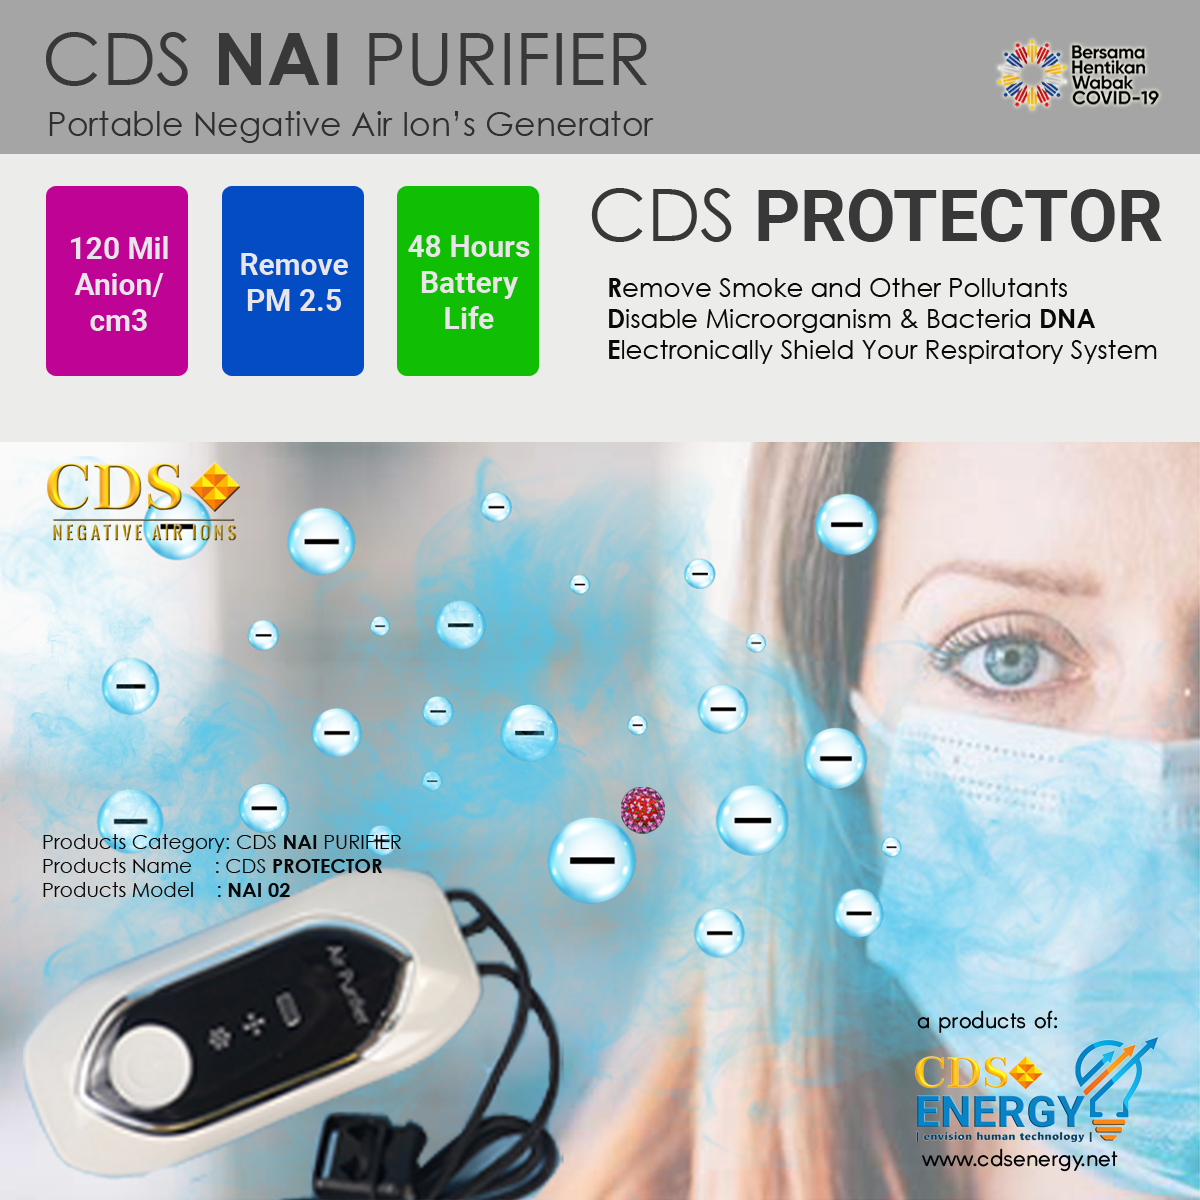 CDS Protector